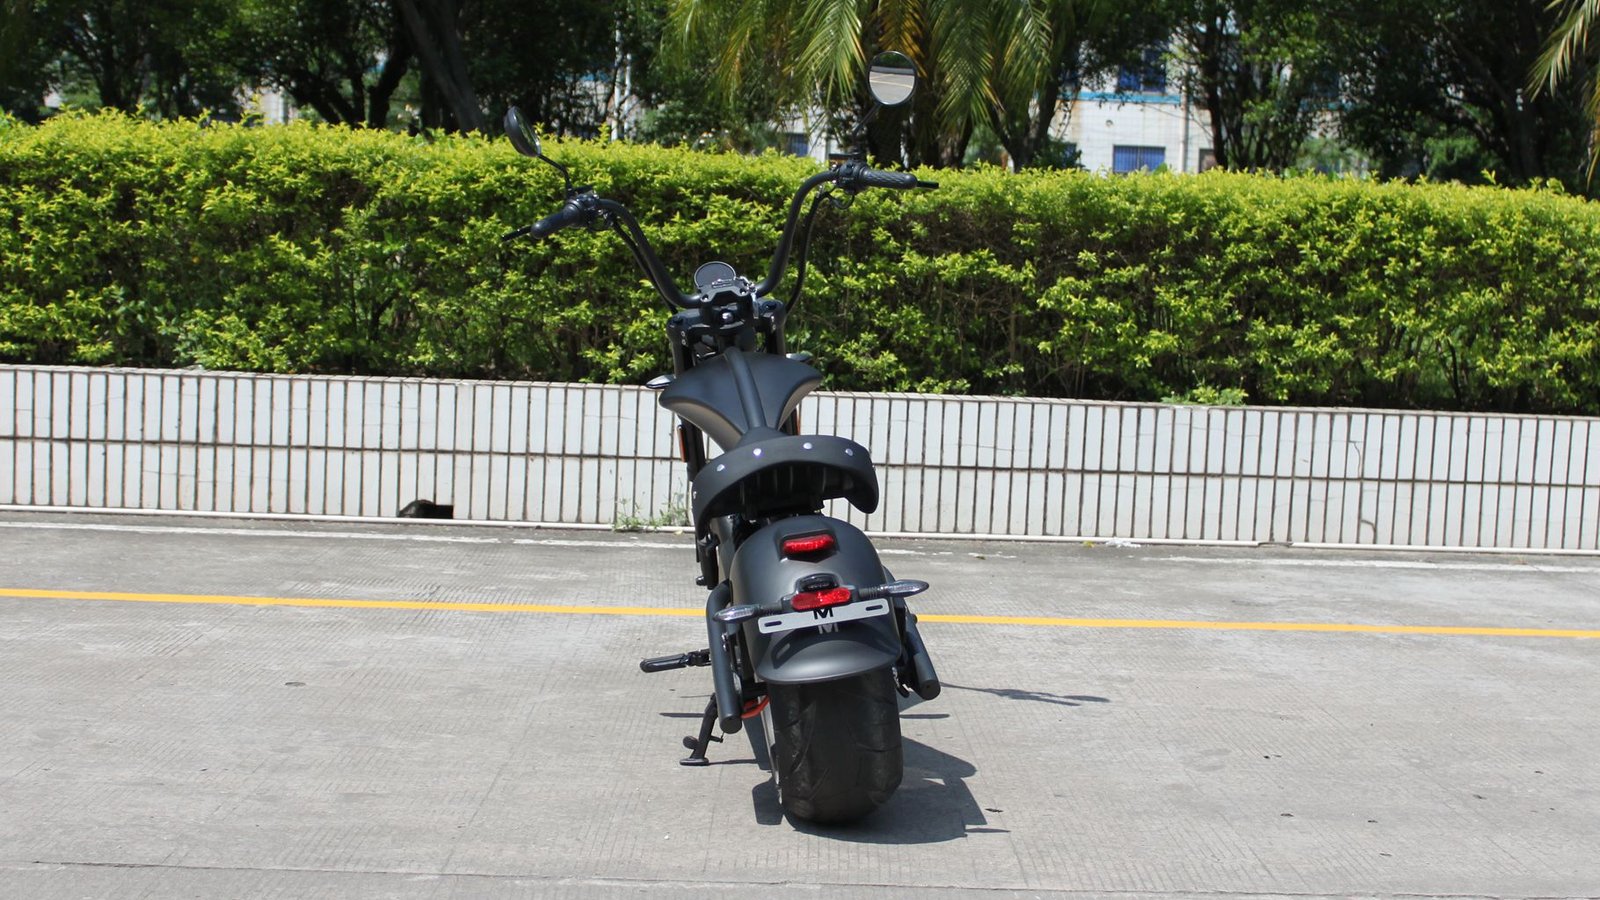 Rooder Mangosteen Sara M1ps 72v 4000w citycoco chopper electric motorcycle scooter (7)